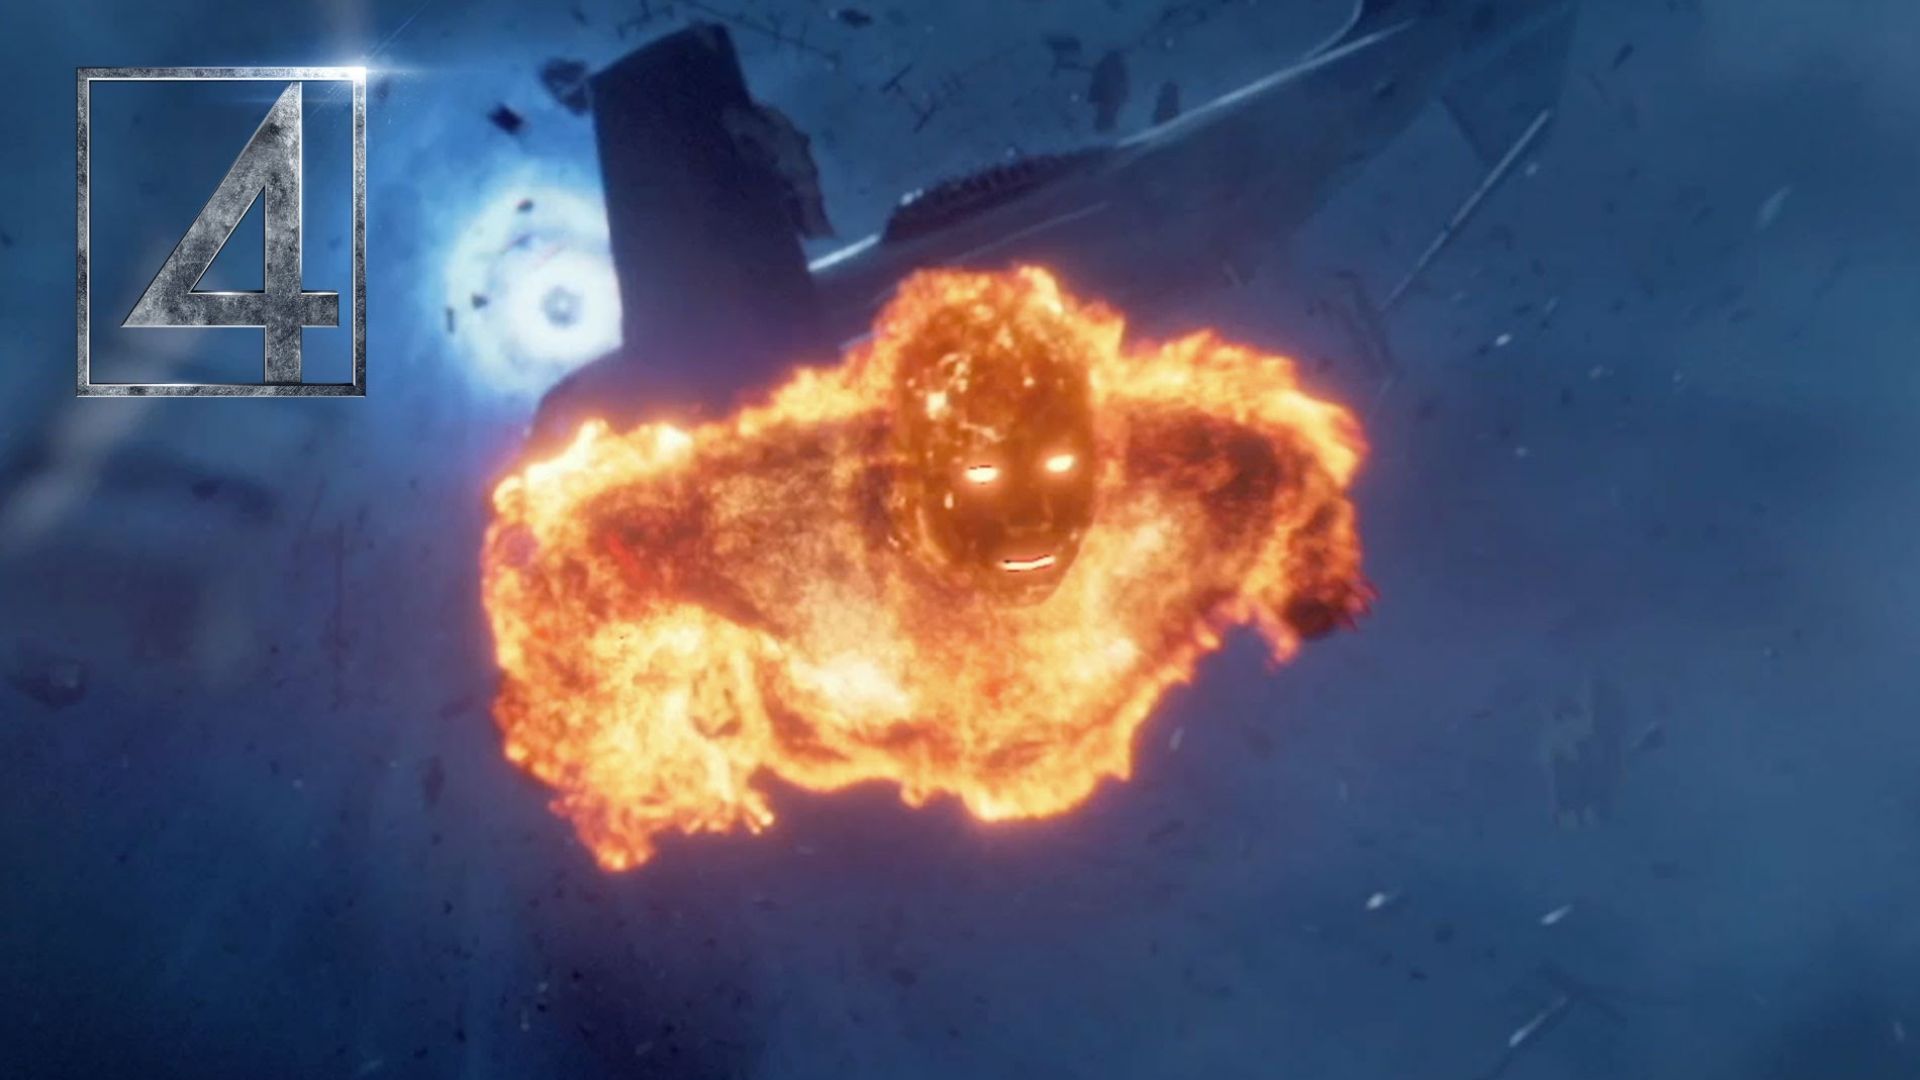 Watch the extended 'Fantastic Four' Sneak Preview with anoth